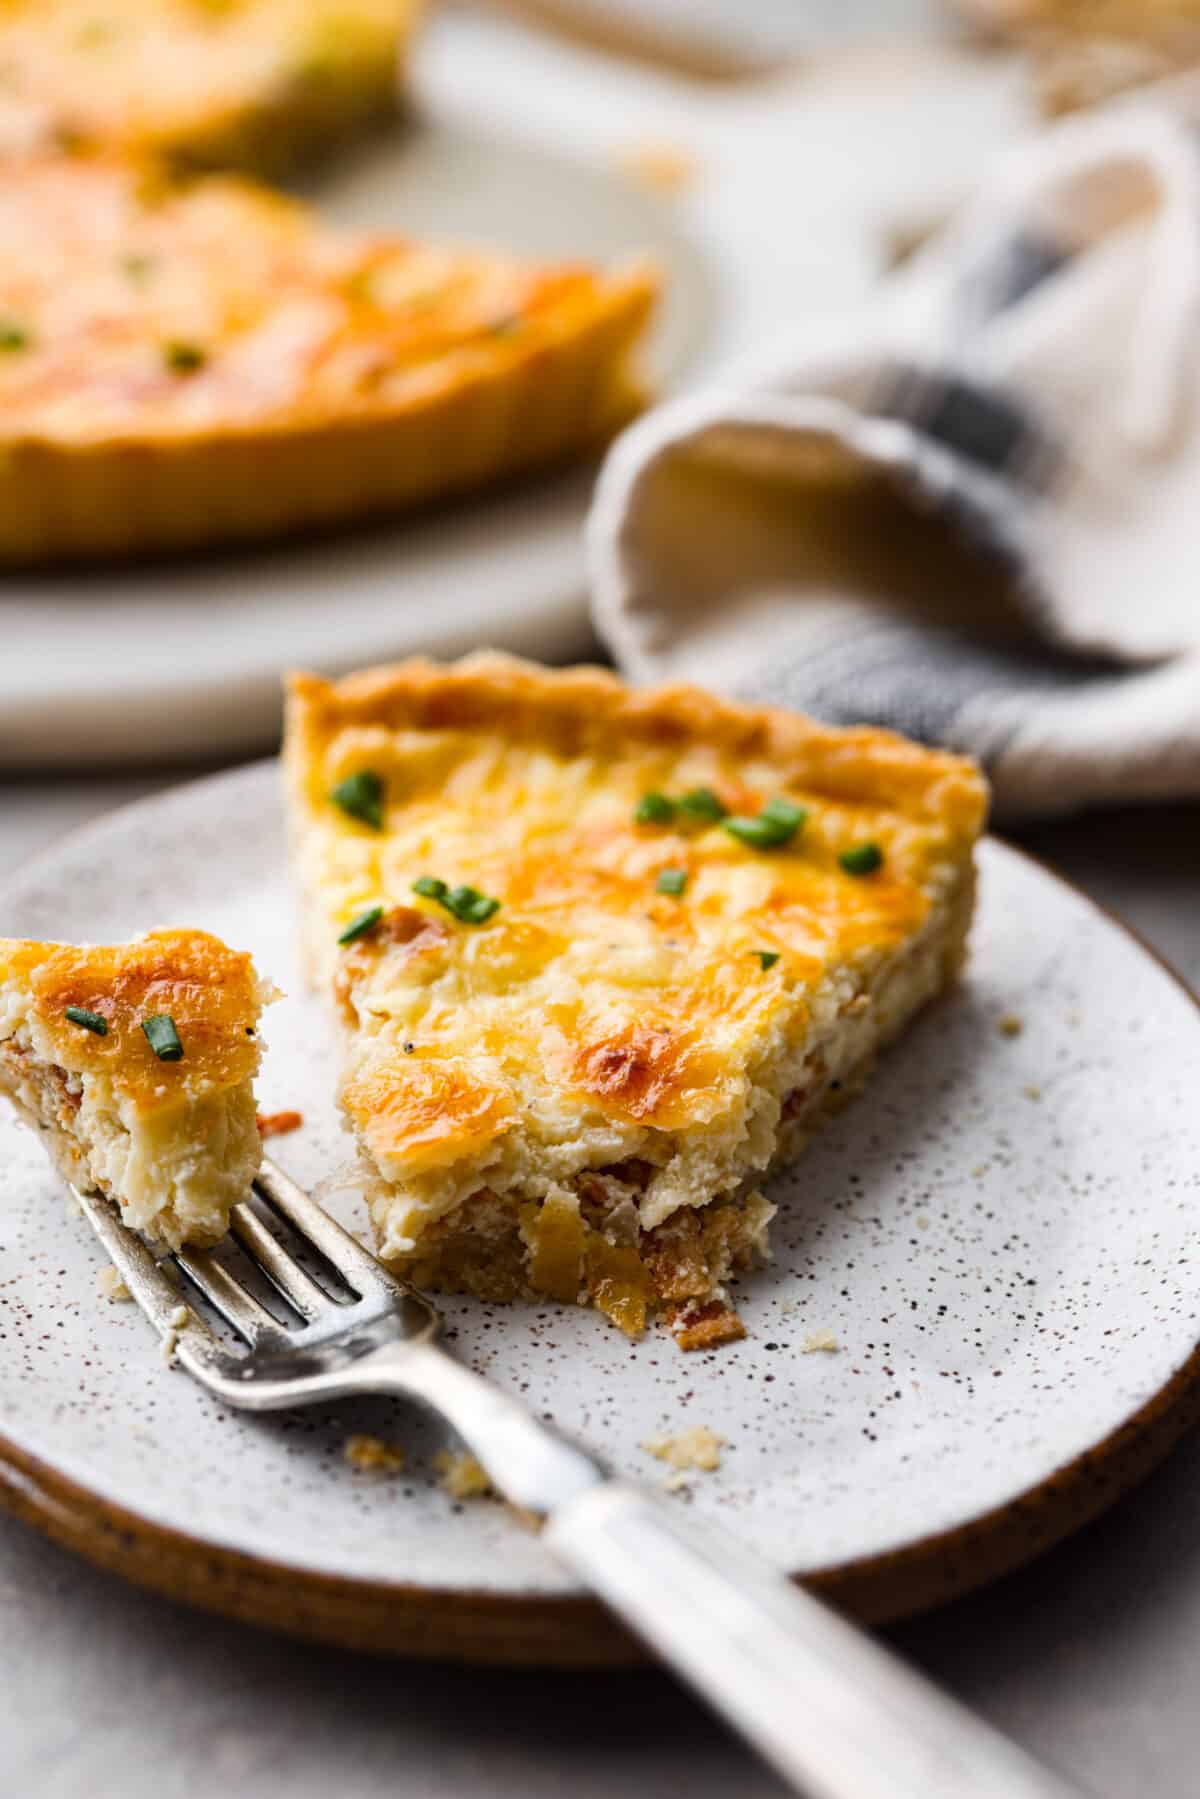 A slice of quiche lorraine with a bite taken out of it on a stoneware plate.